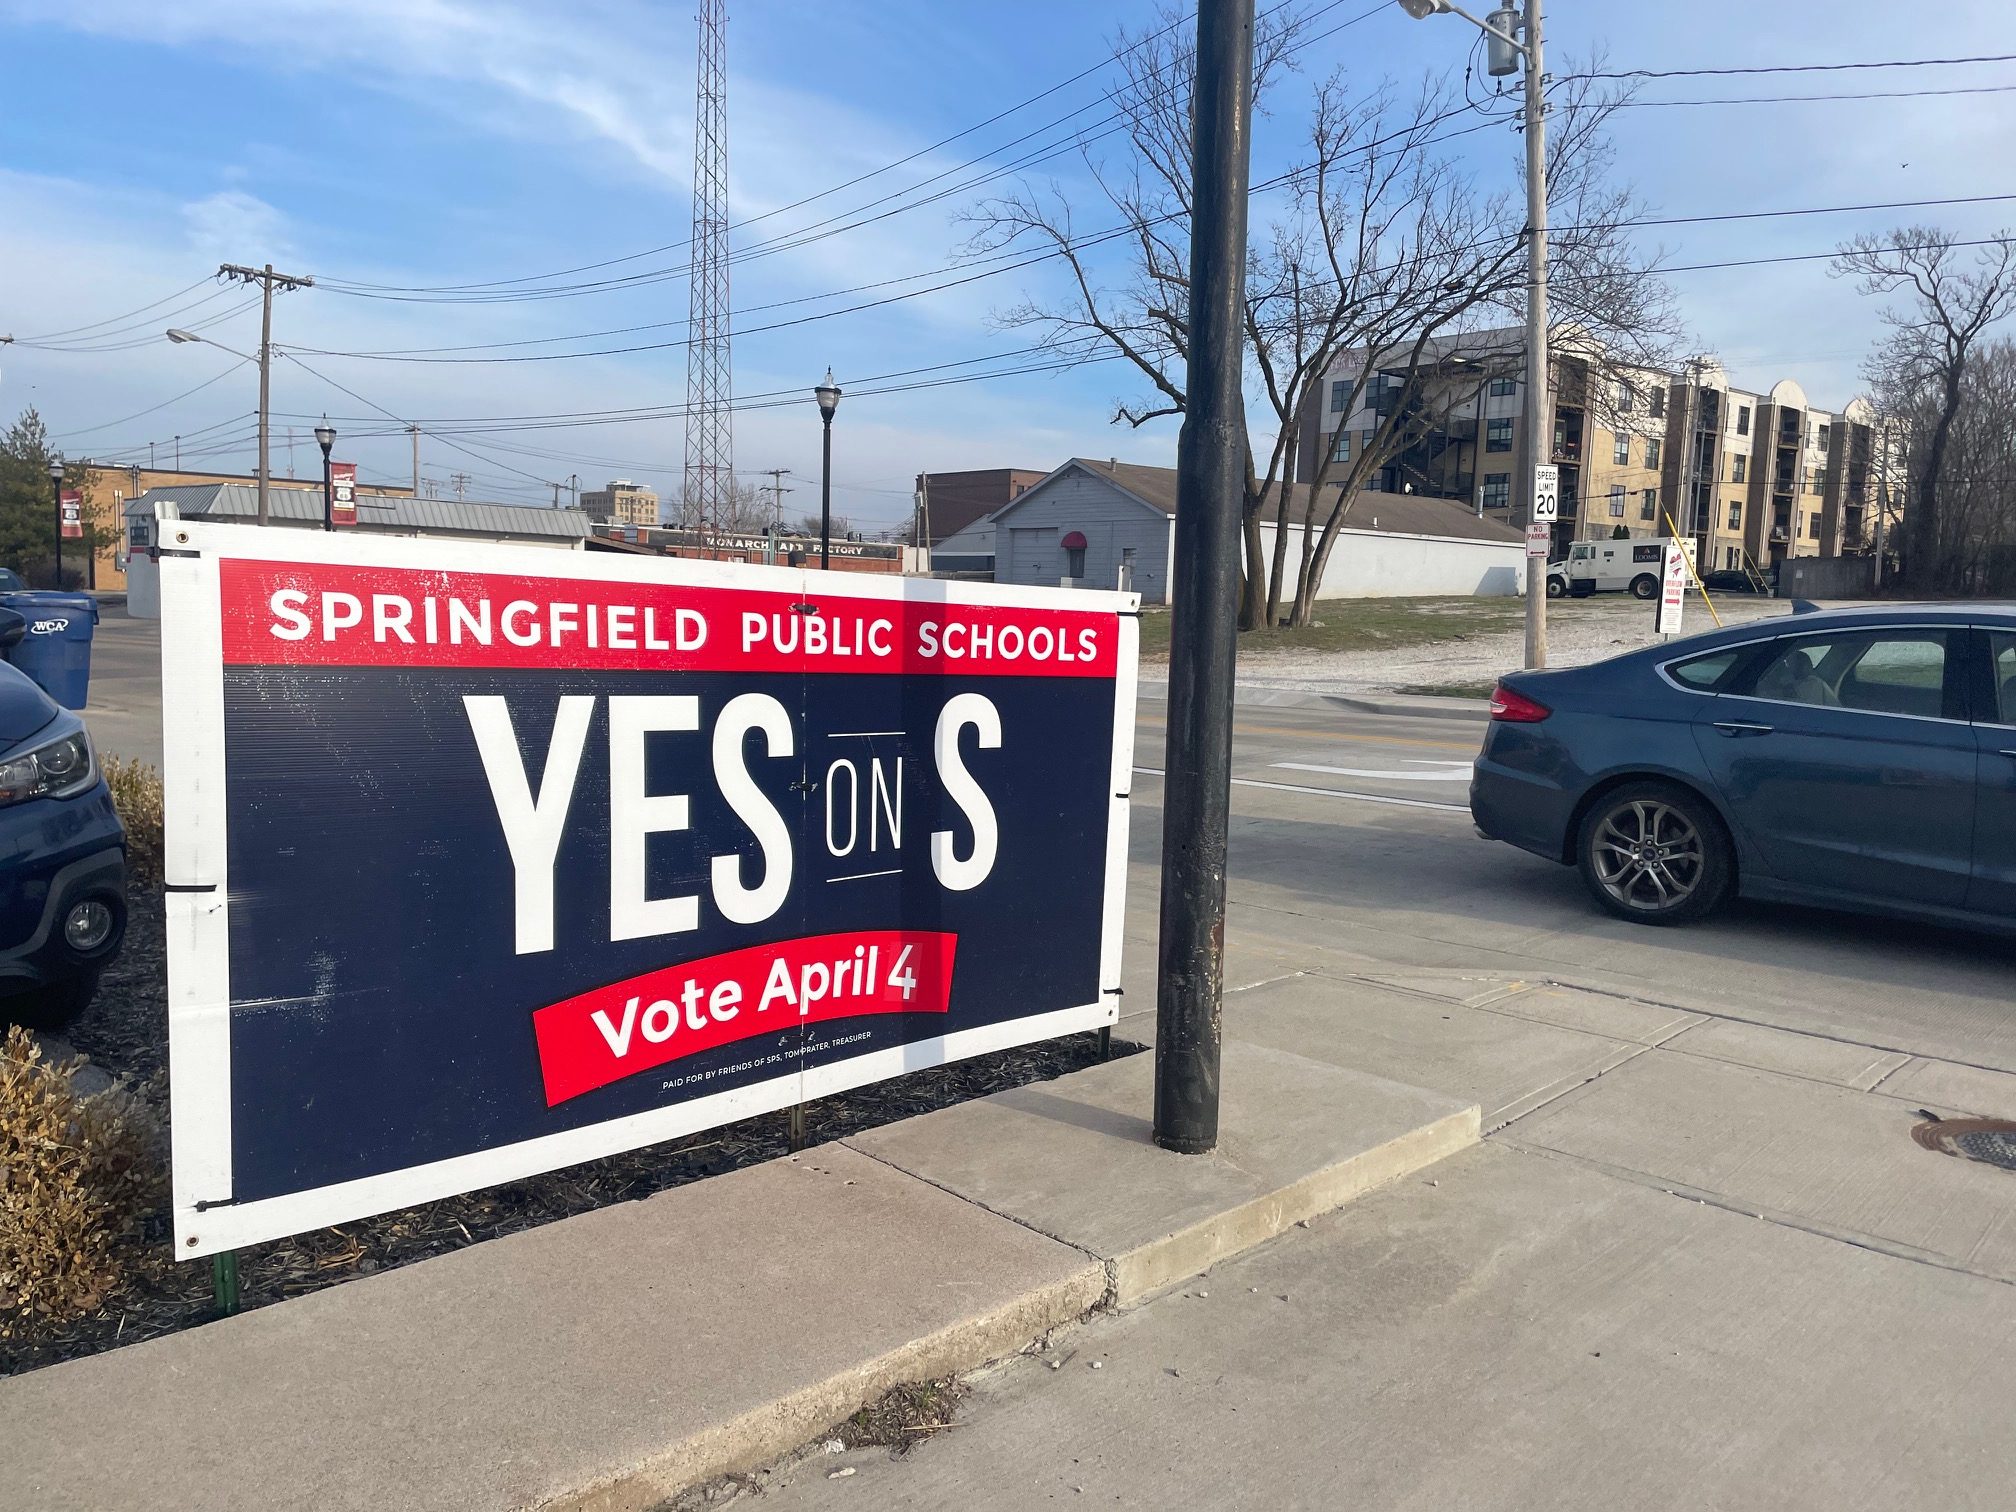 All 4 candidates for Springfield school board plan to vote ‘yes' on $220M bond issue